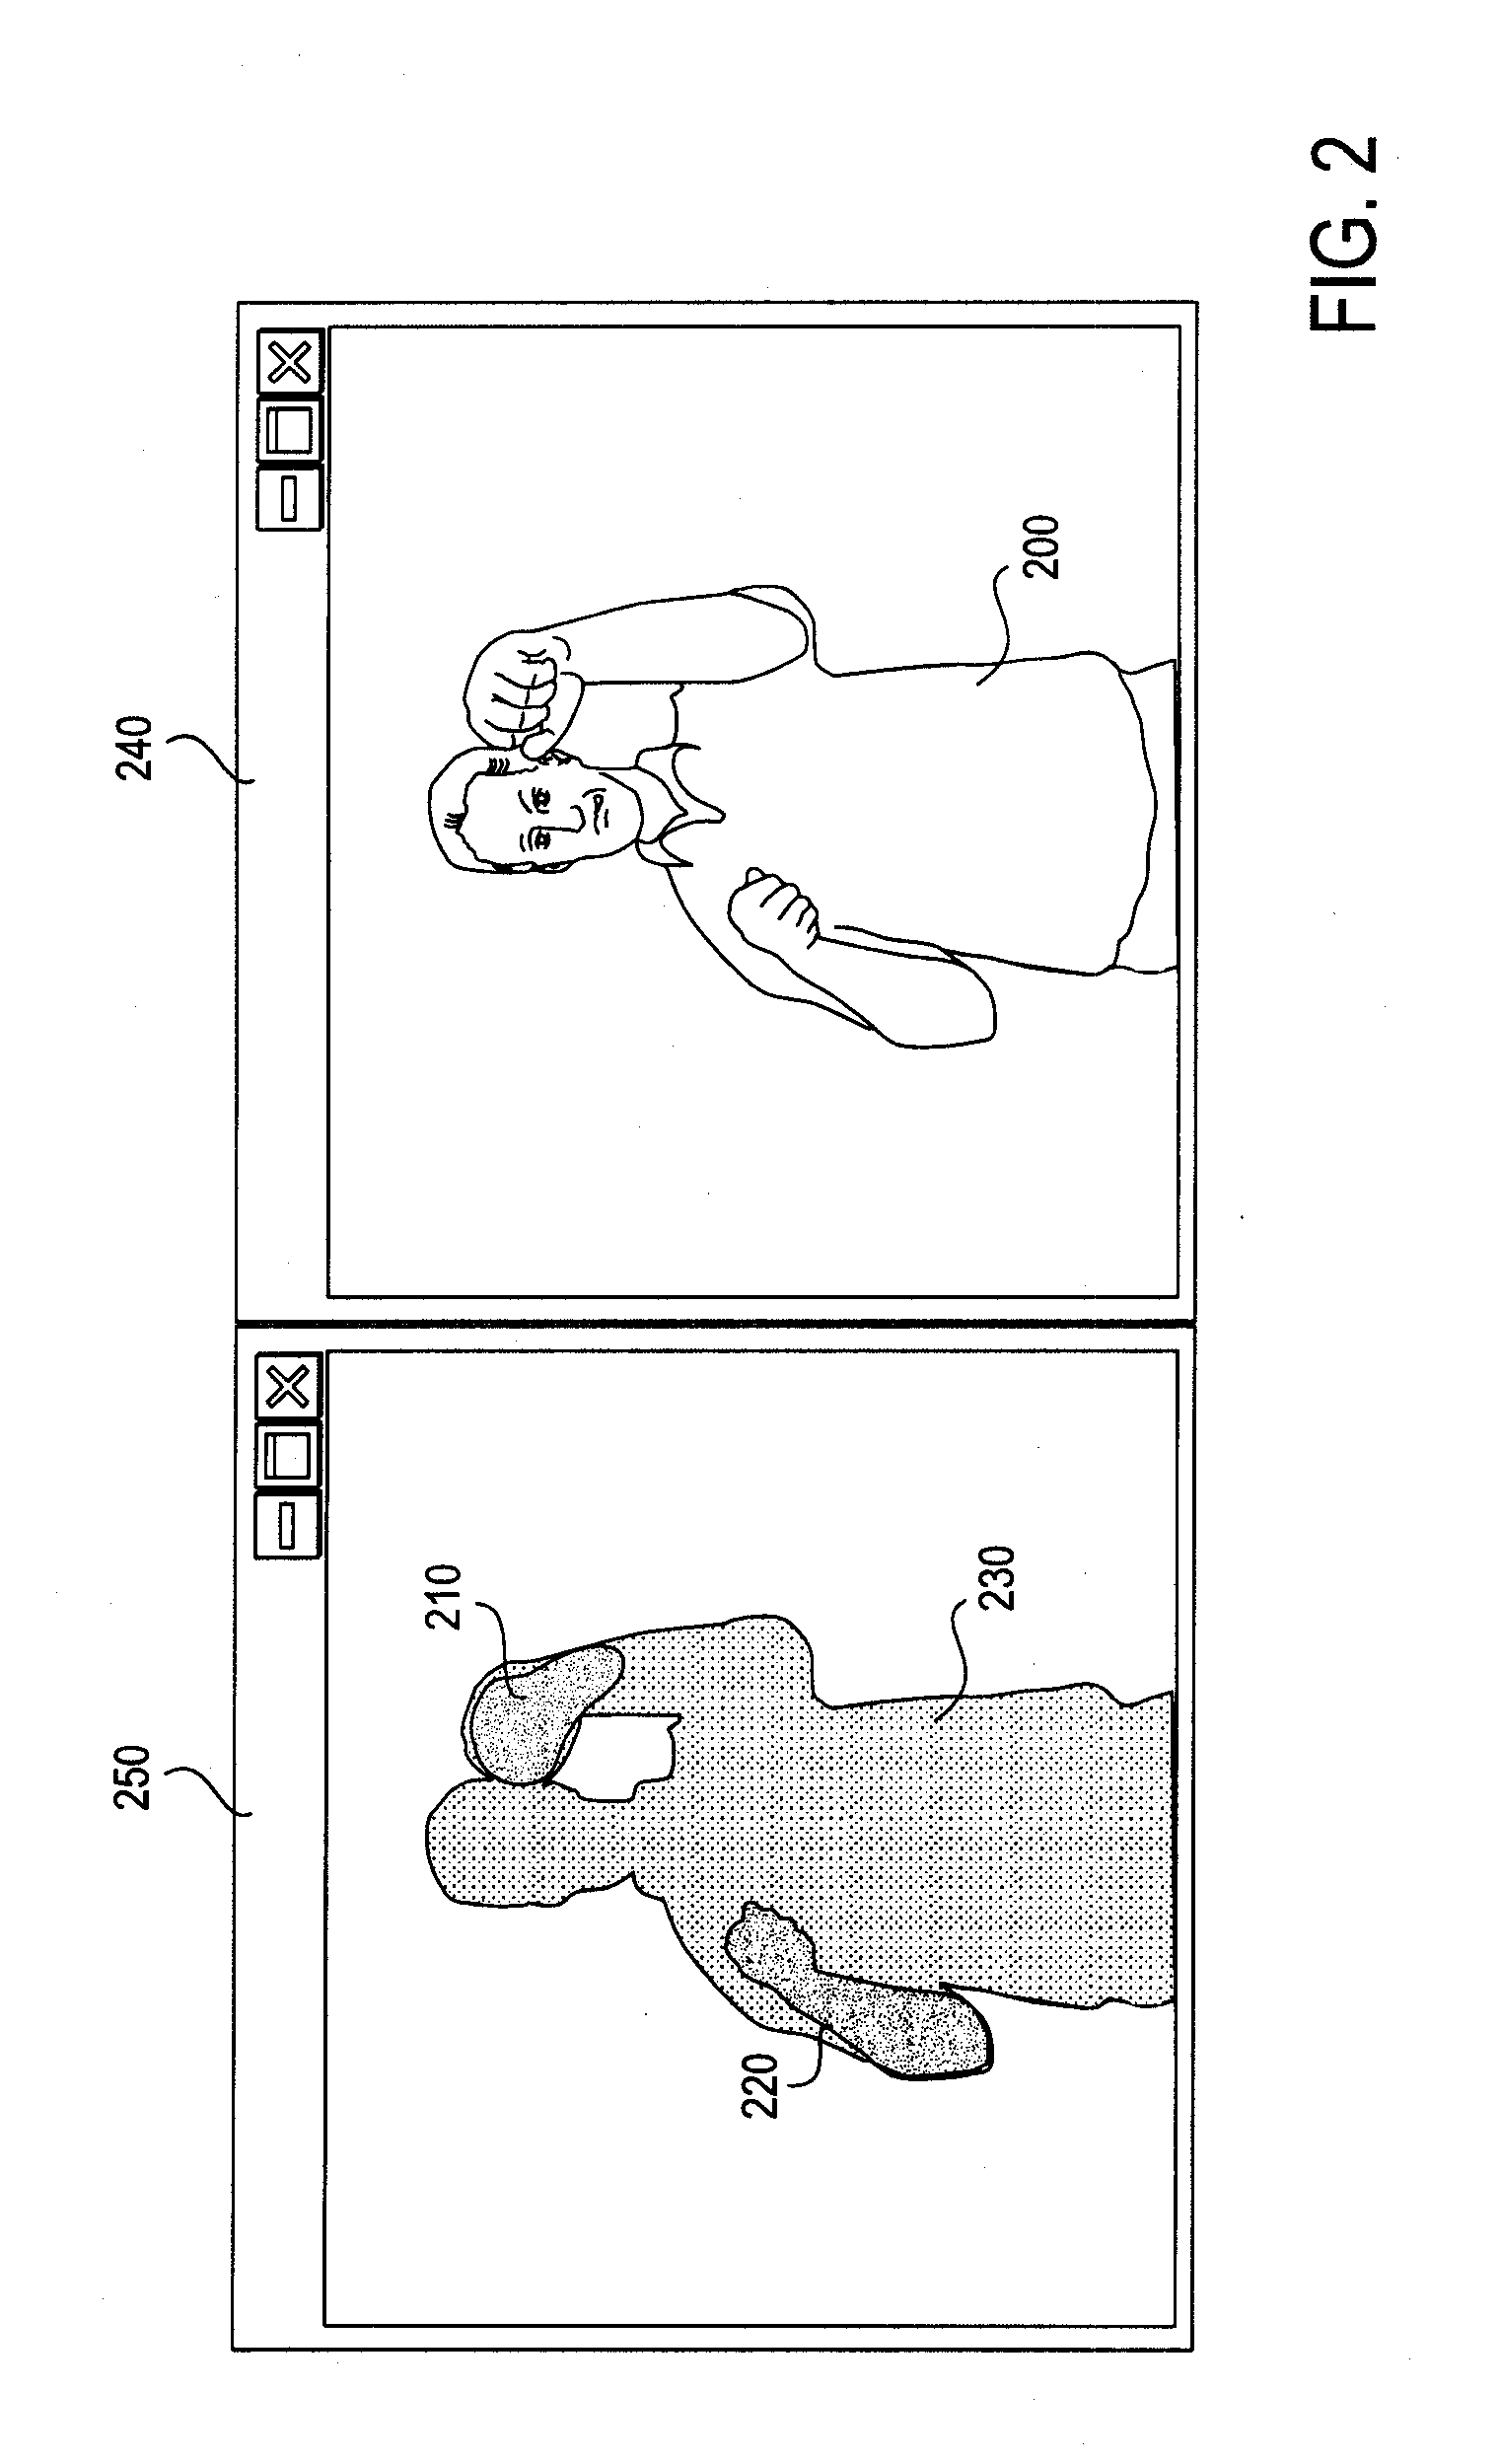 Method and system for vision-based interaction in a virtual environment